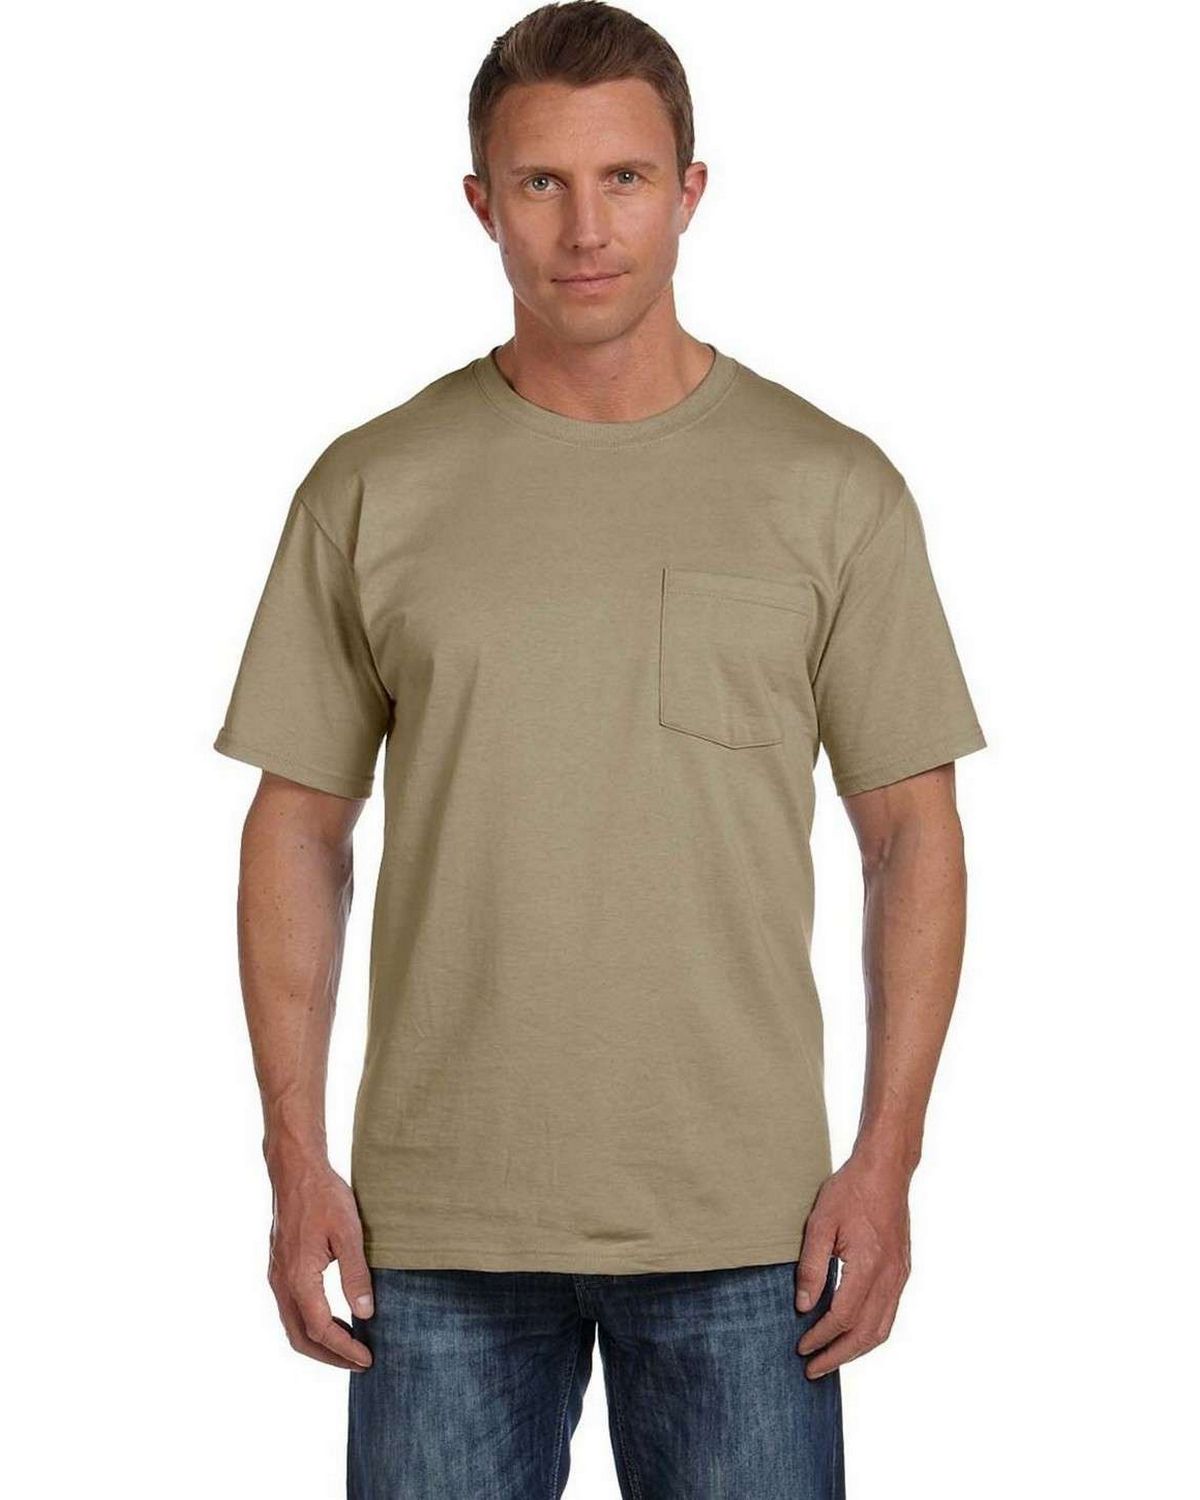 Fruit of the Loom 3931P Cotton Pocket T-Shirt